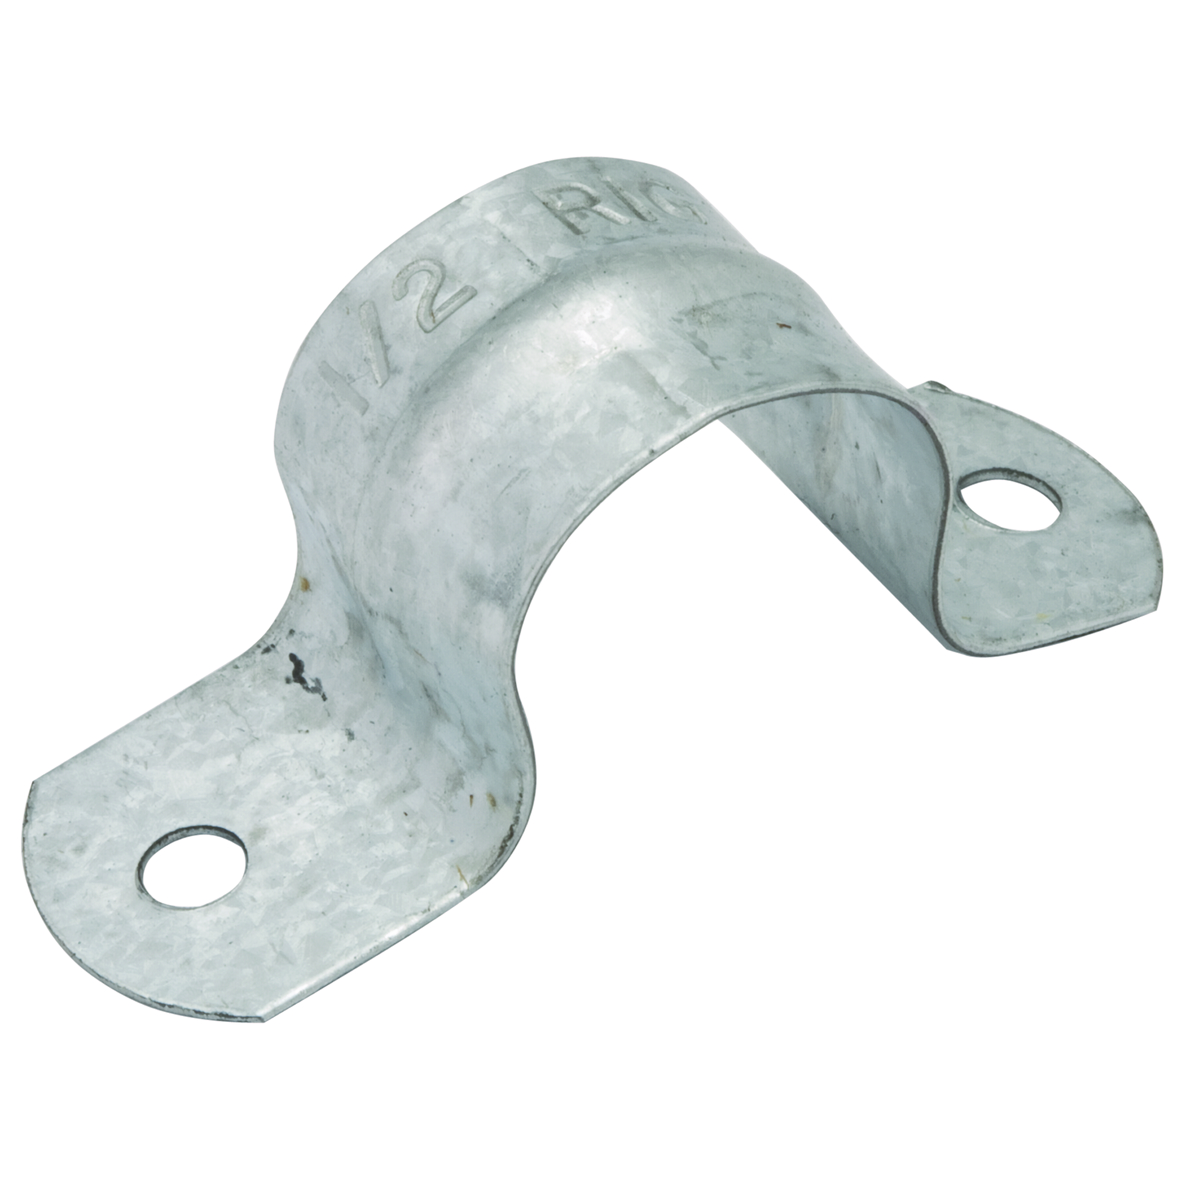 Two Hole Straps Stamped Steel, 1/2 In. Trade Size RGD/IMC/FLEX 2-HOLE 1/2 IN